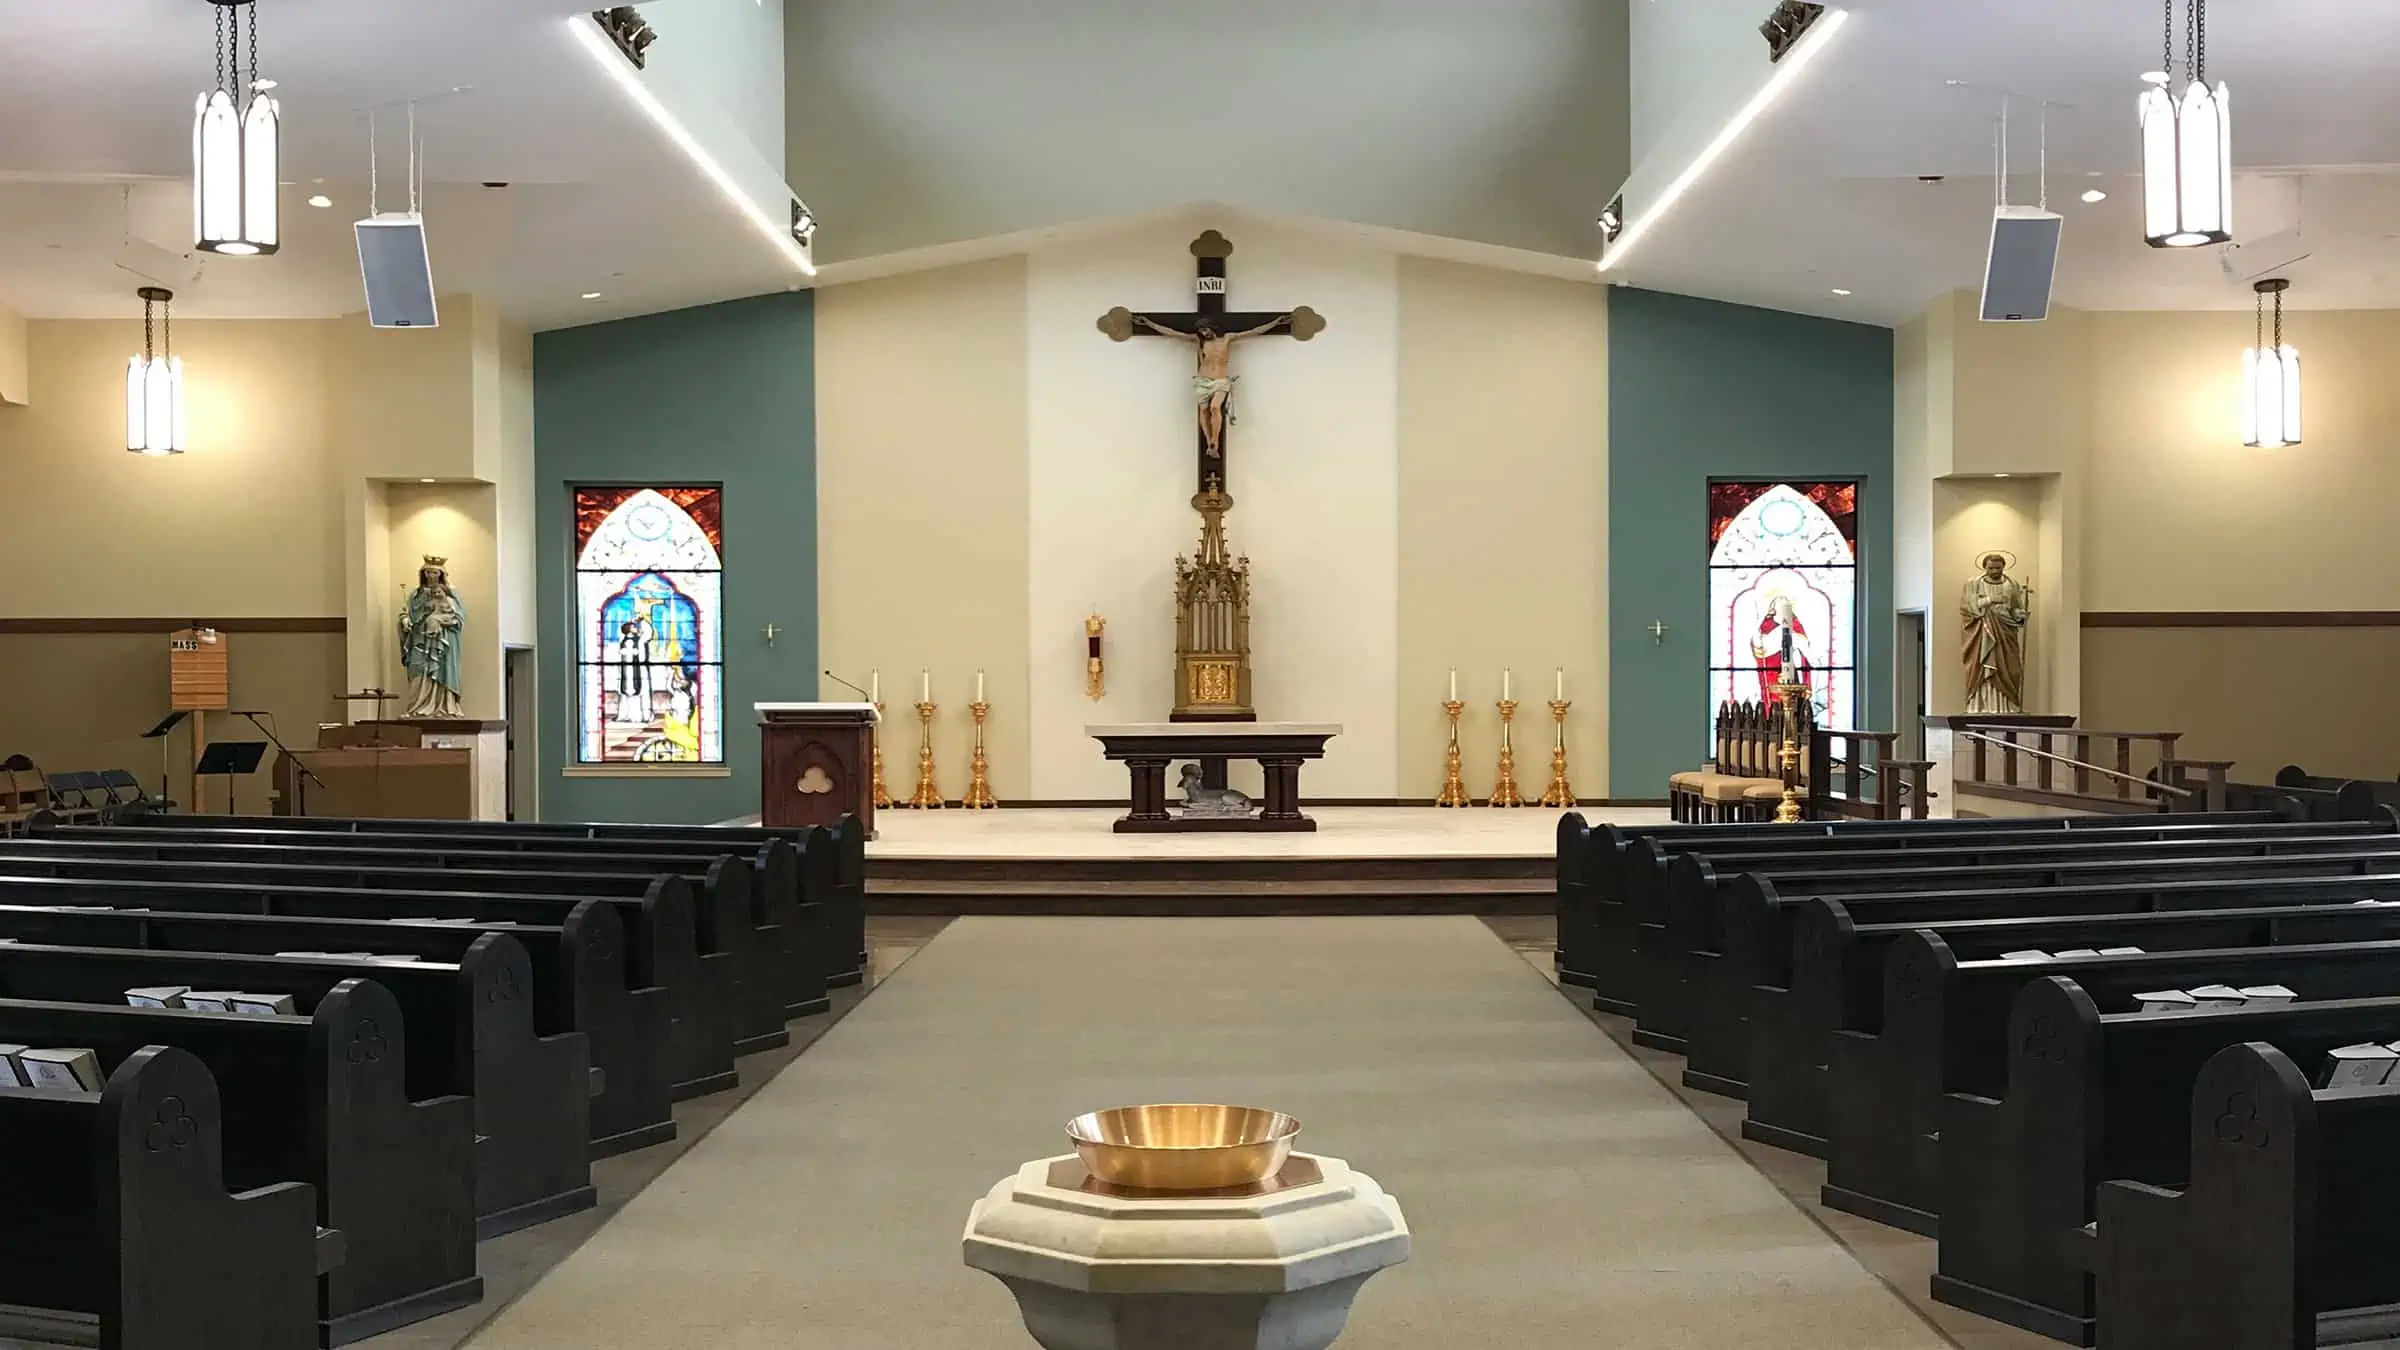 Holy Trinity Catholic Church Interior View of Altar and Seating